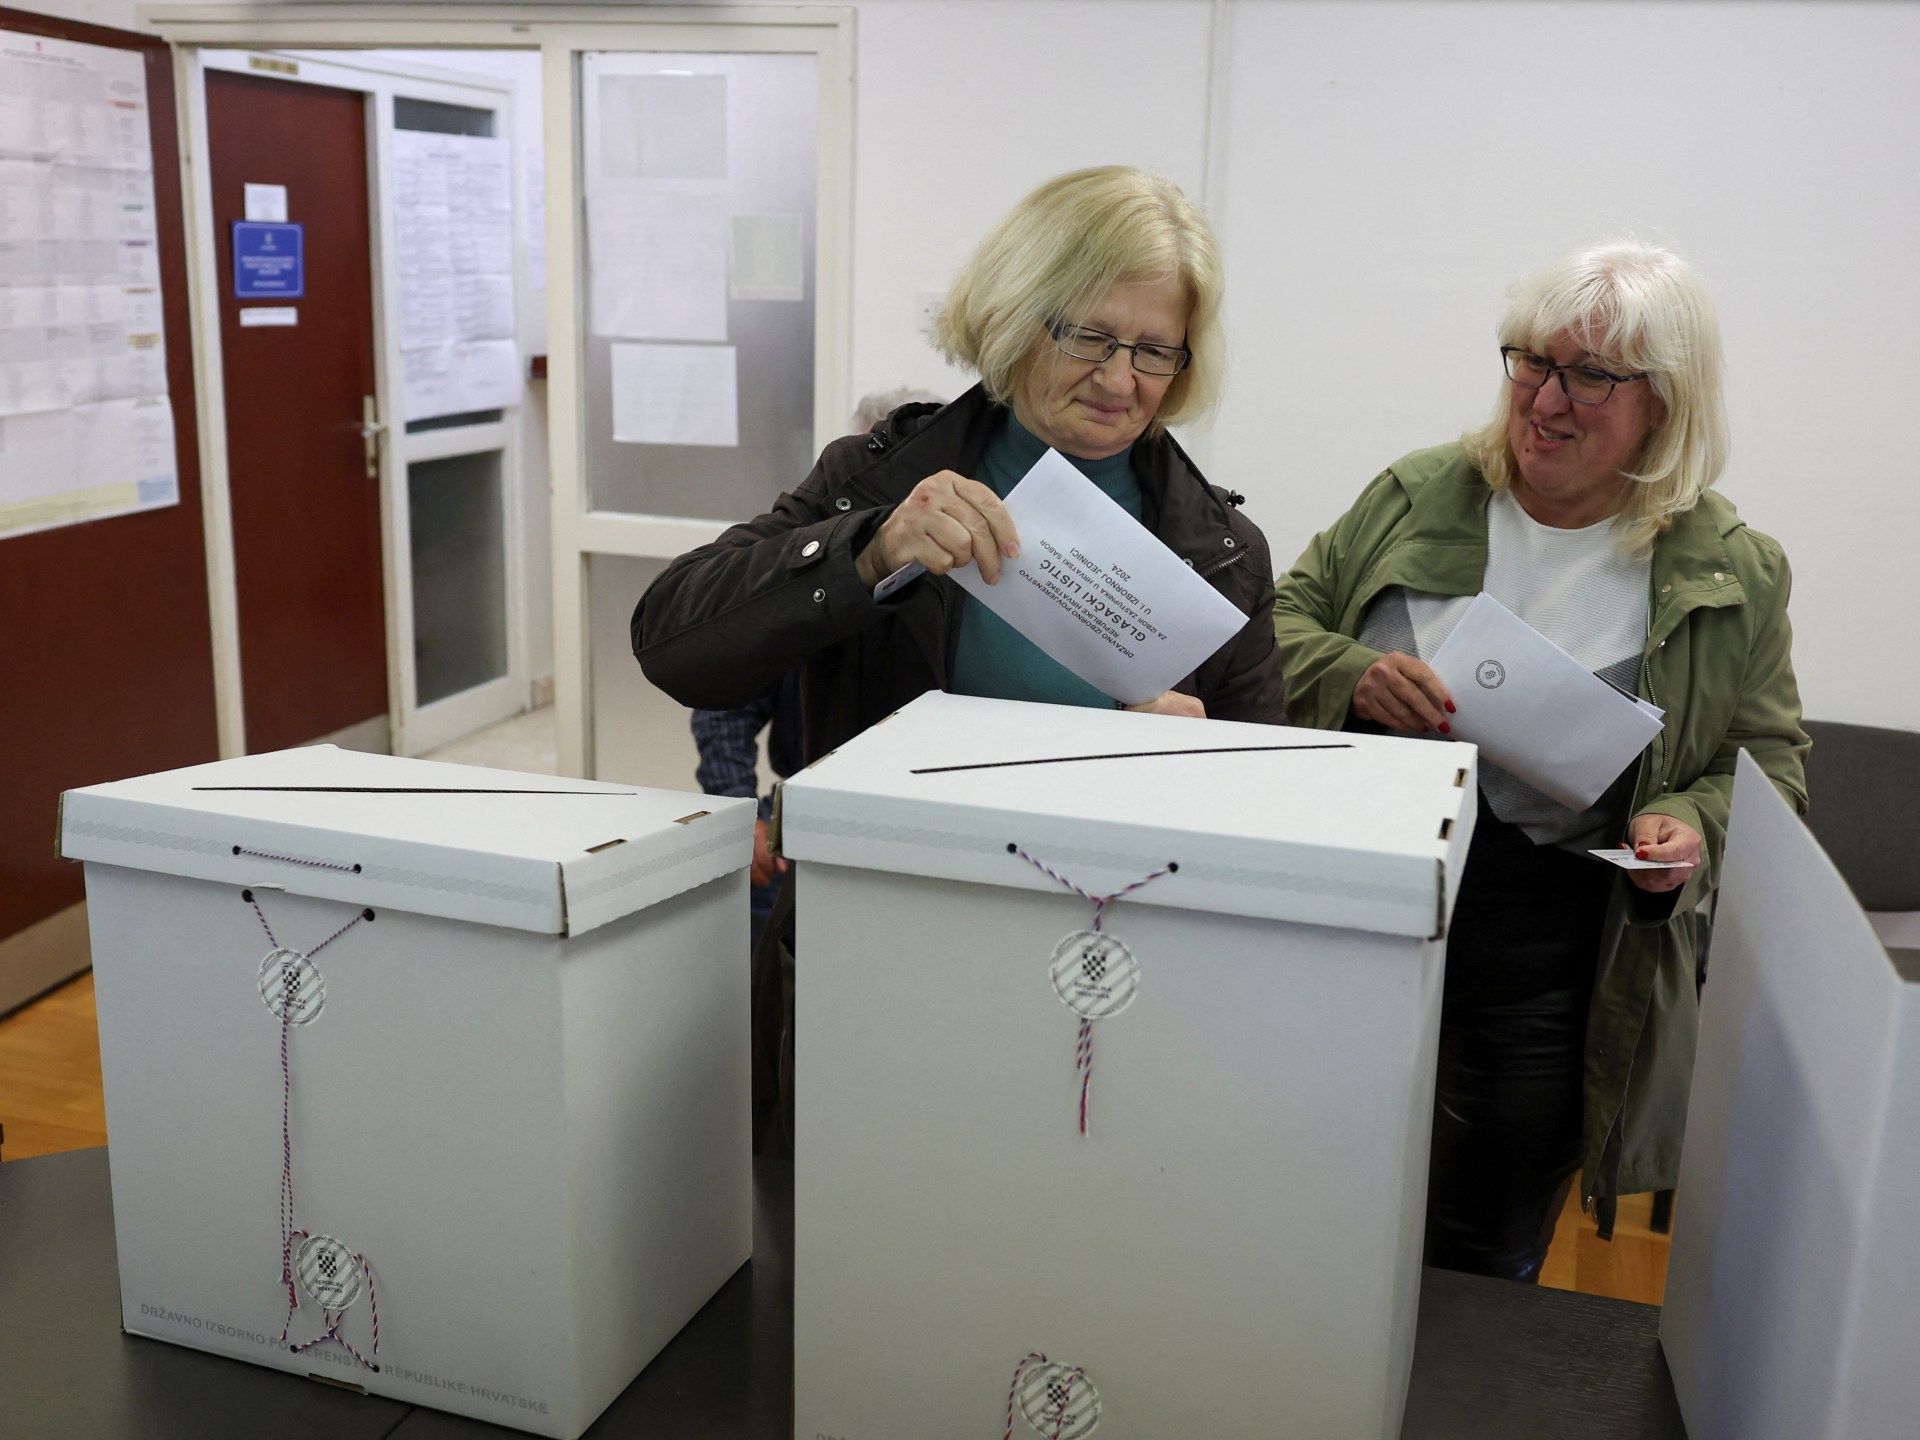 Croatia ruling party heading for election win without majority: Exit poll